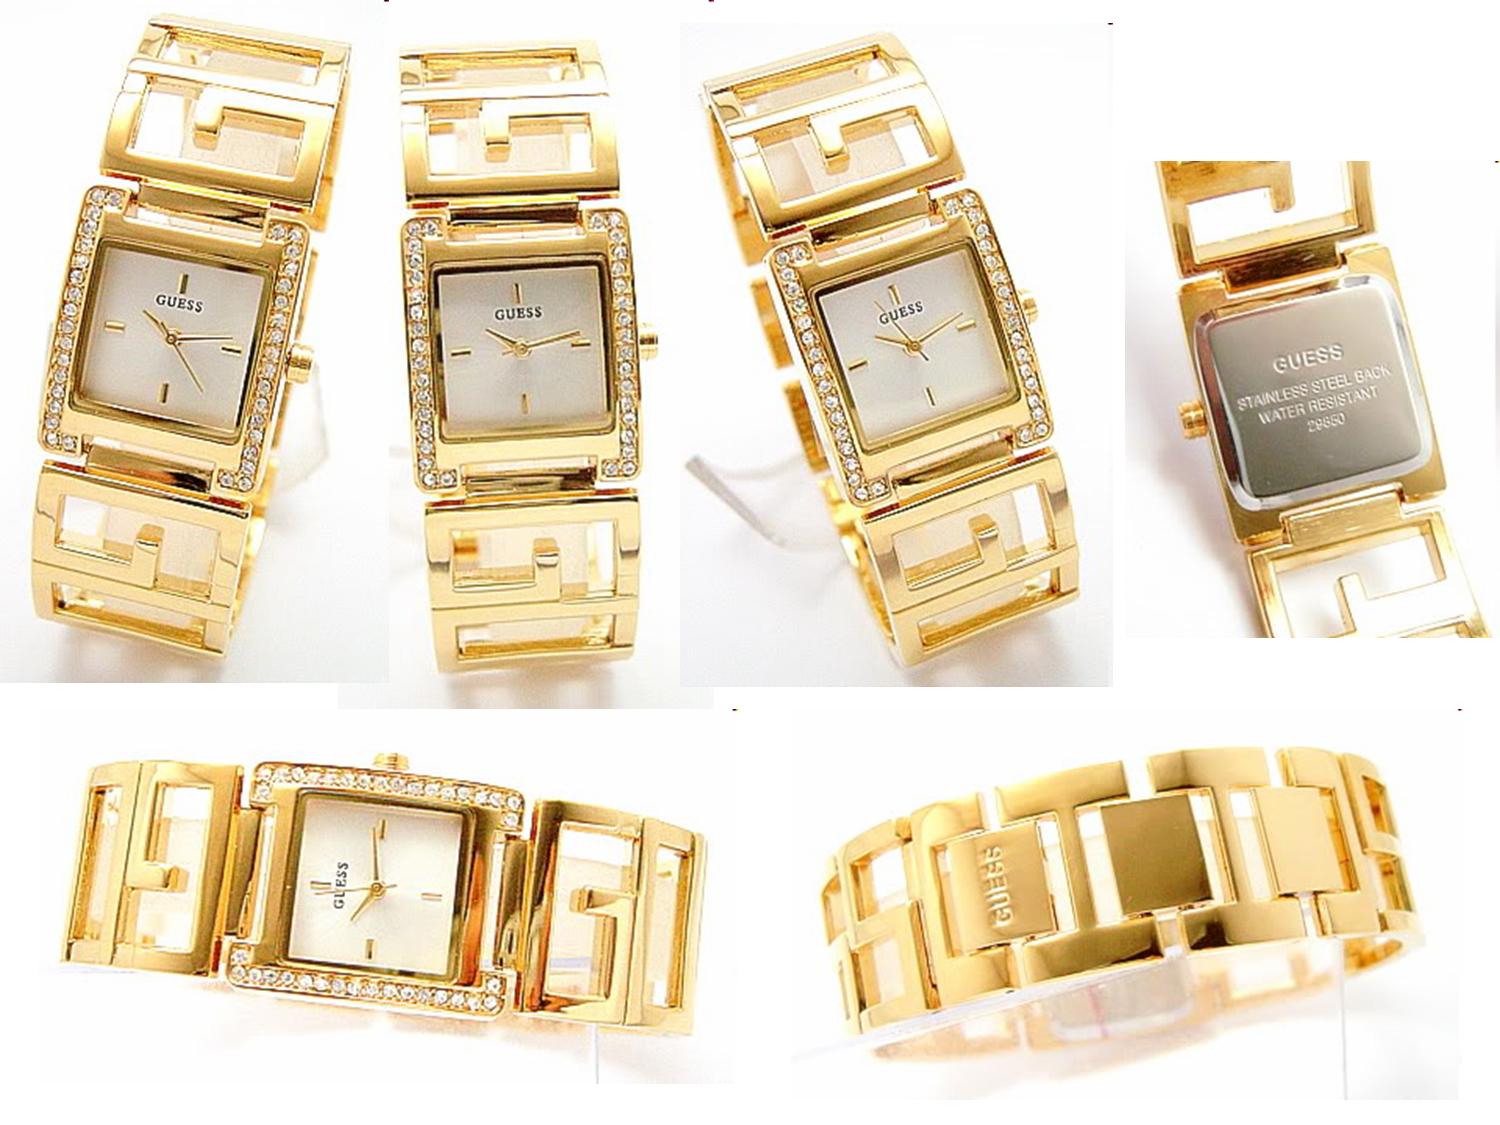 AFDREAMZONE: Replica Watches For Women